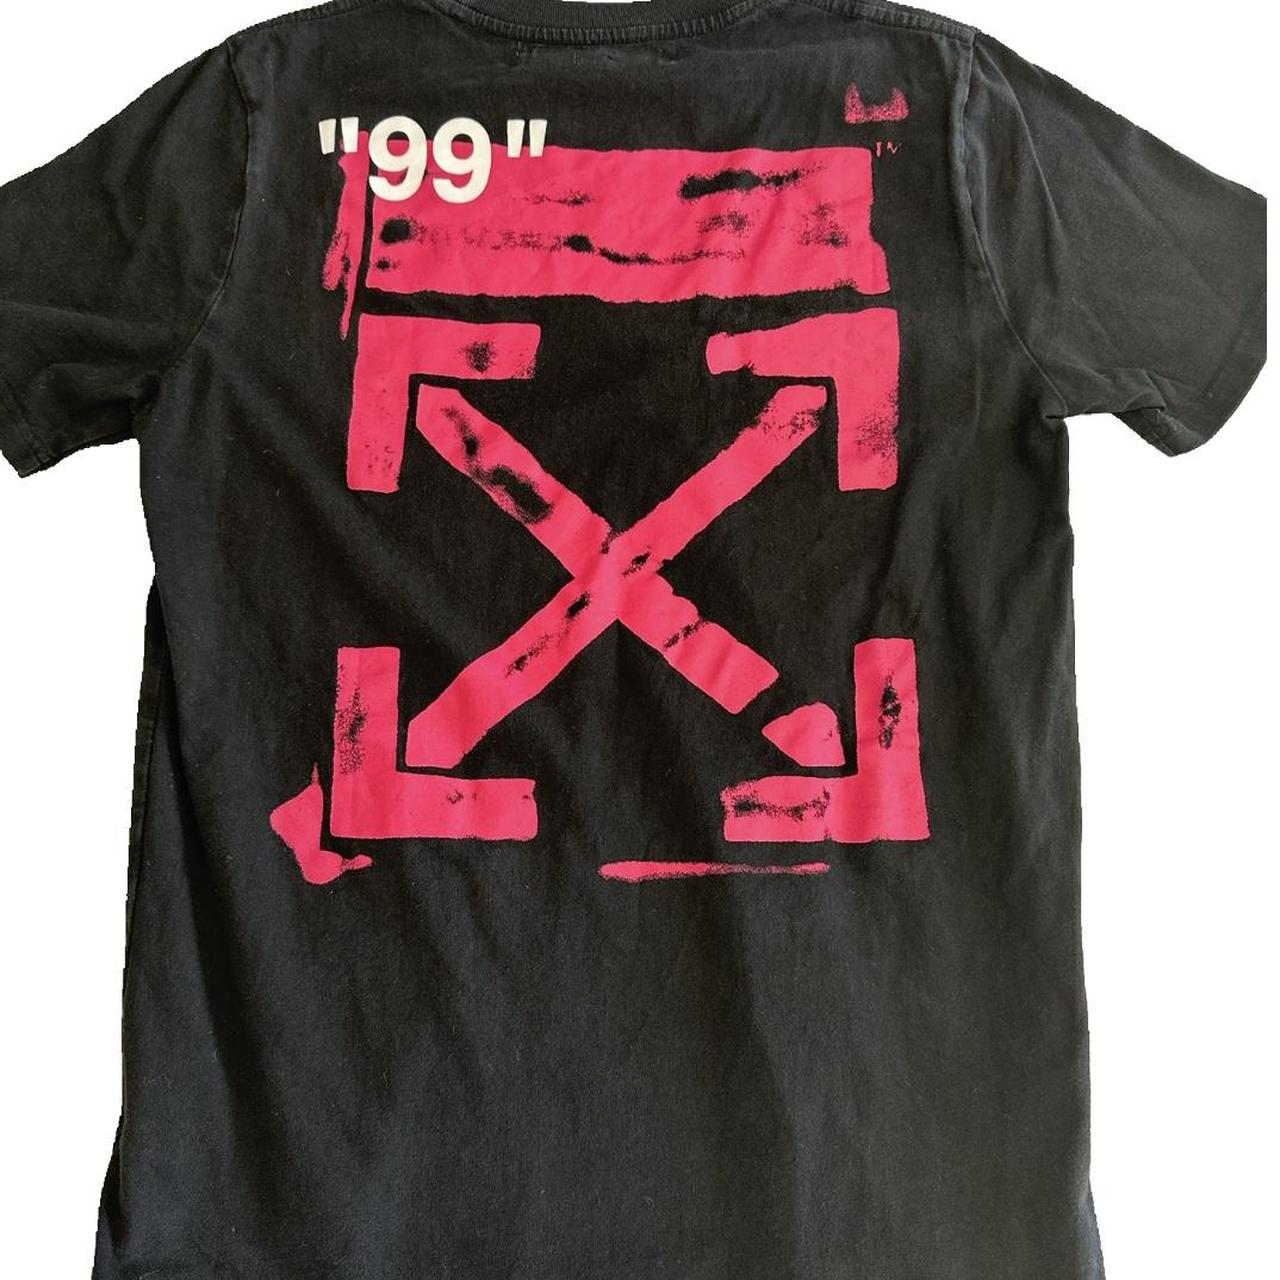 Off-White Men's Black and Pink T-shirt (2)